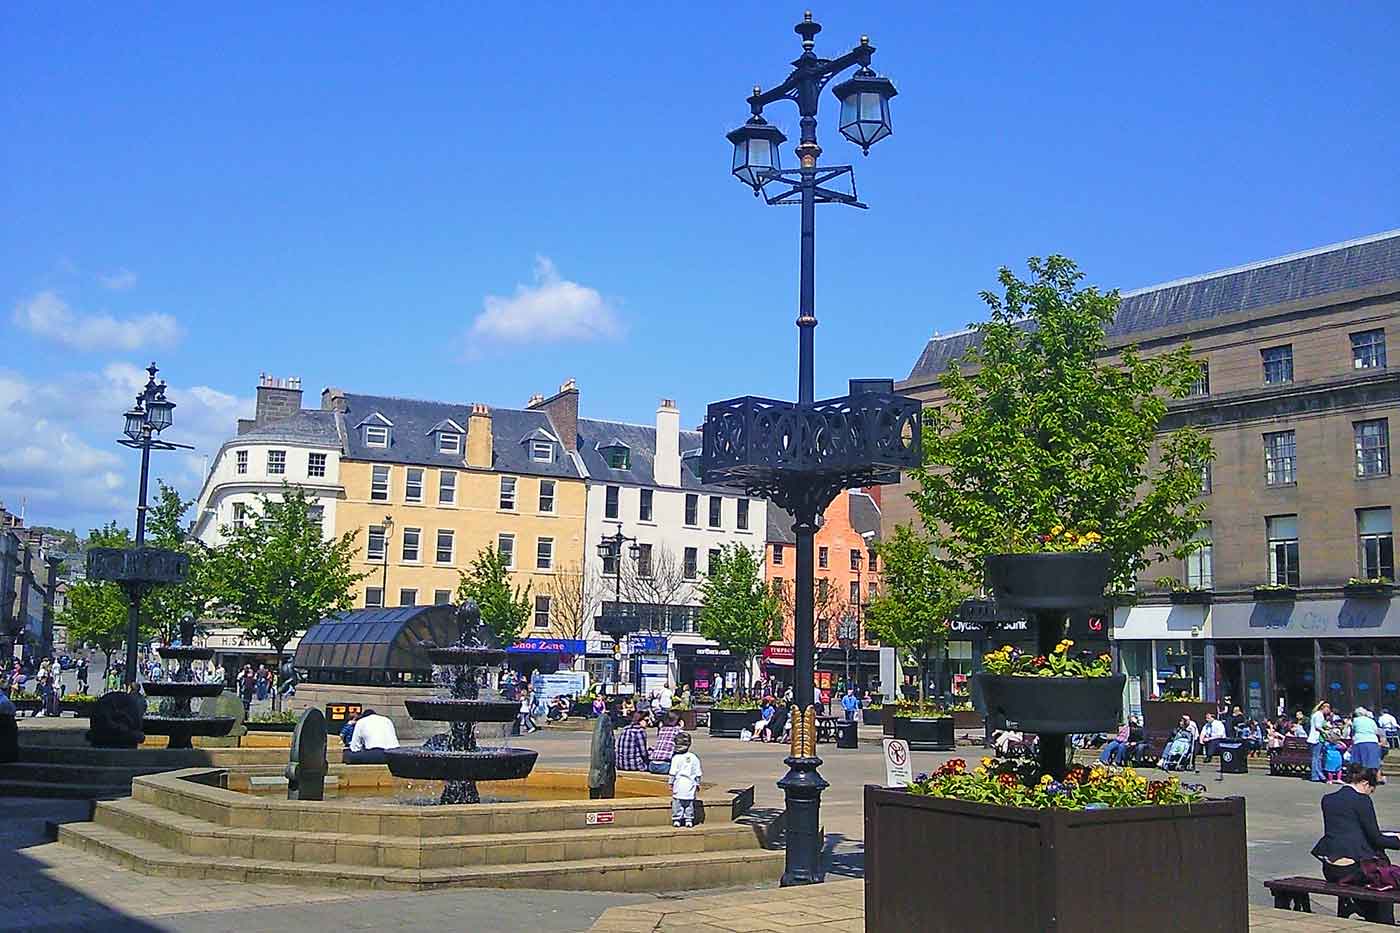 Dundee City Square